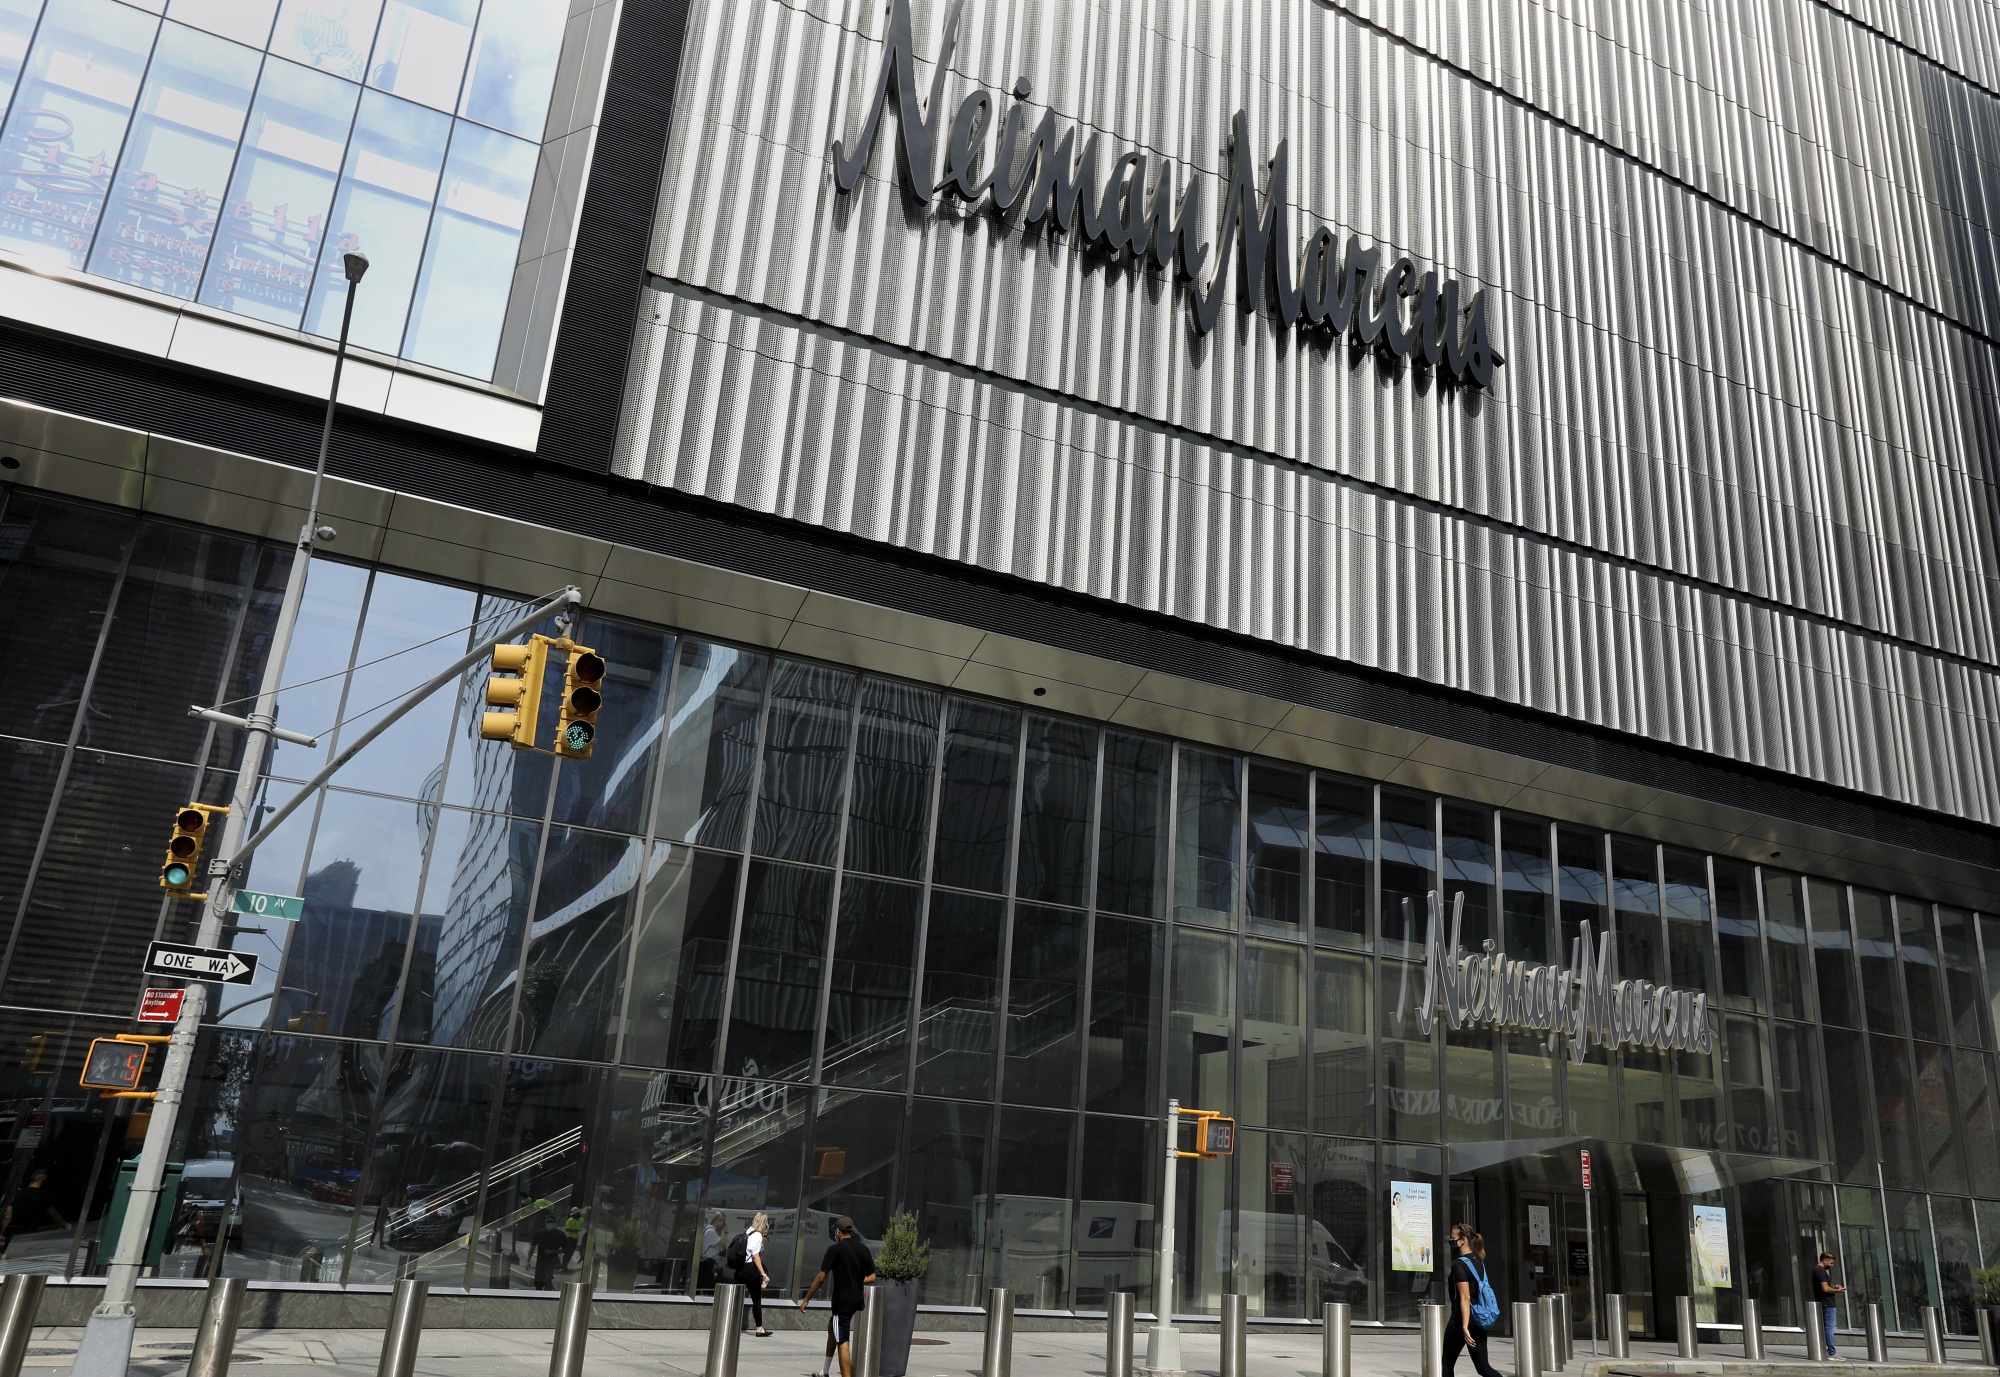 Neiman Marcus to close its Hudson Yards store and three more in